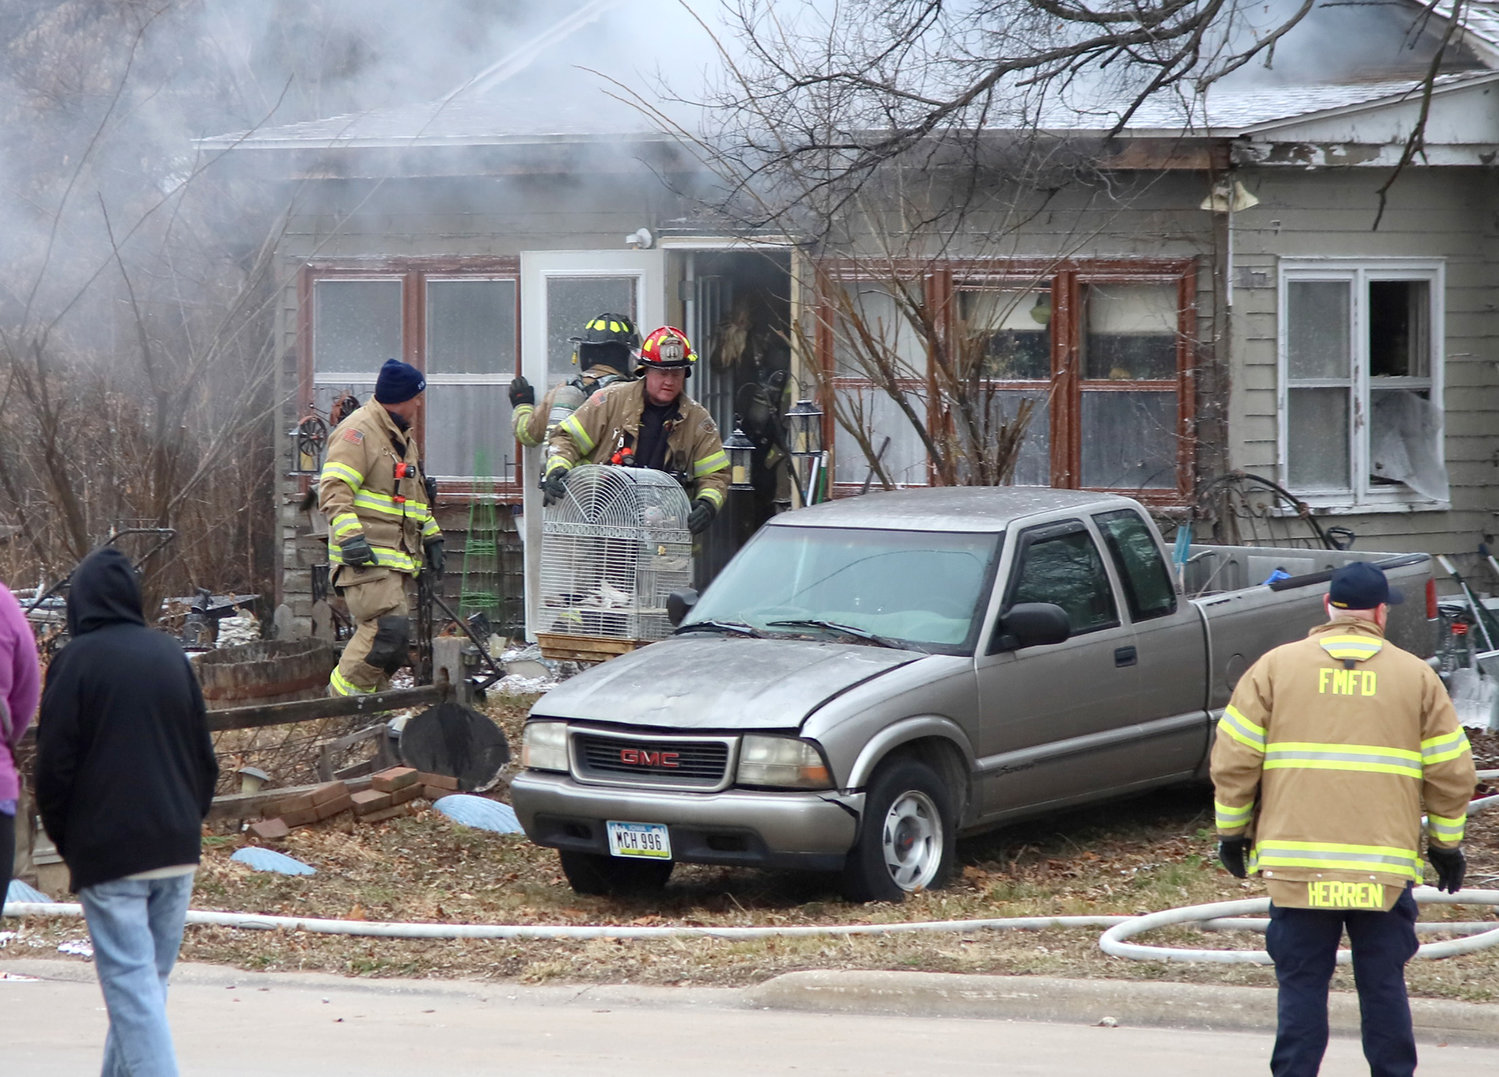 Fire Capt. Jay Blanchard carries a couple of live birds out of a burning home at 1623 33rd Street Thursday afternoon. The birds survived the blaze and no one was reported injured as a result of the fire in Fort Madison.